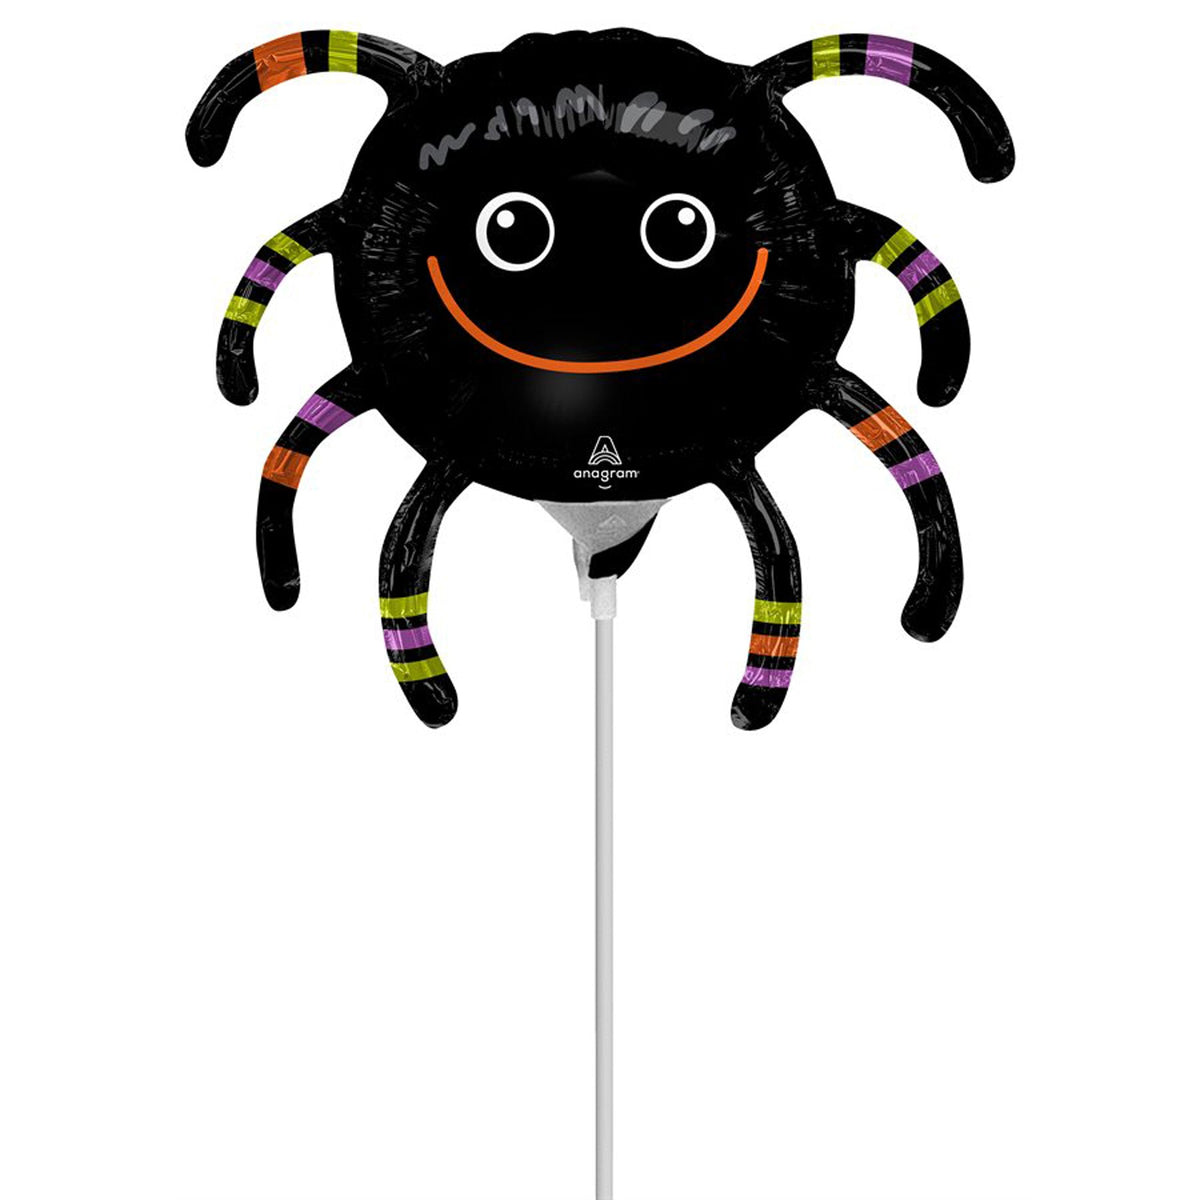 LE GROUPE BLC INTL INC Balloons Halloween Smiley Spider Air-Filled Foil Balloon, 14 Inches 026635448178